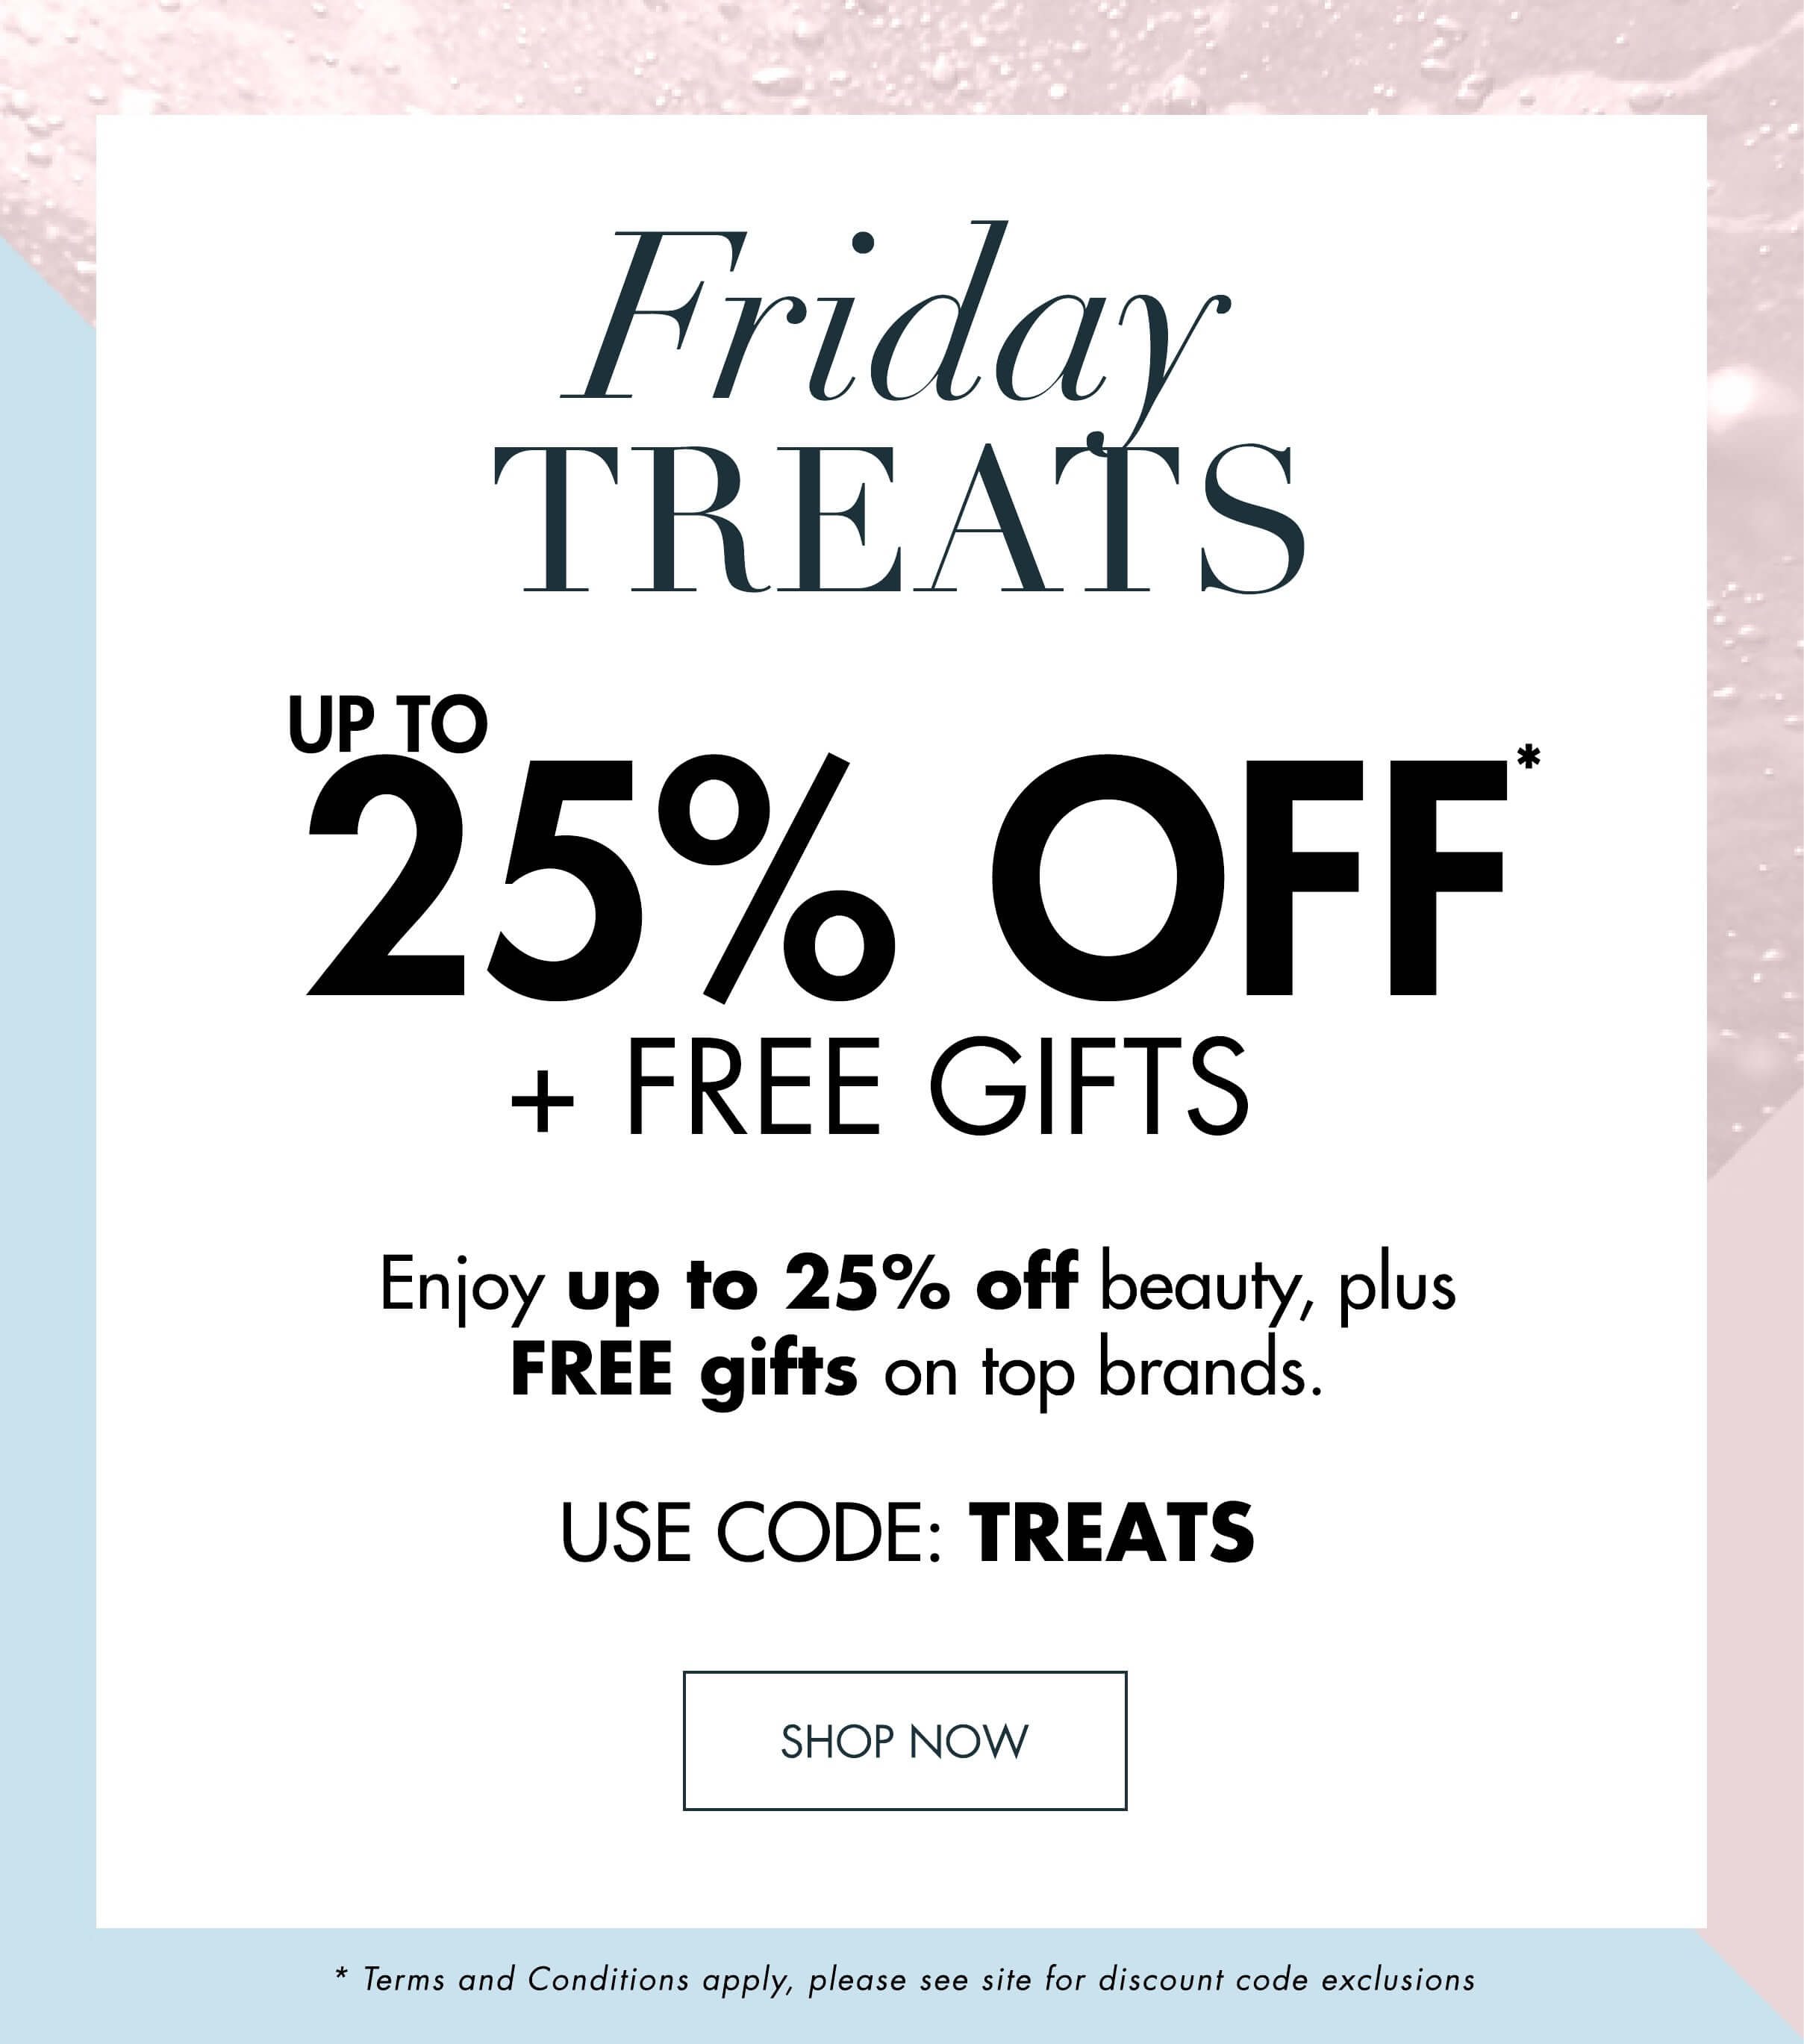 UP TO 25 PERCENT OFF